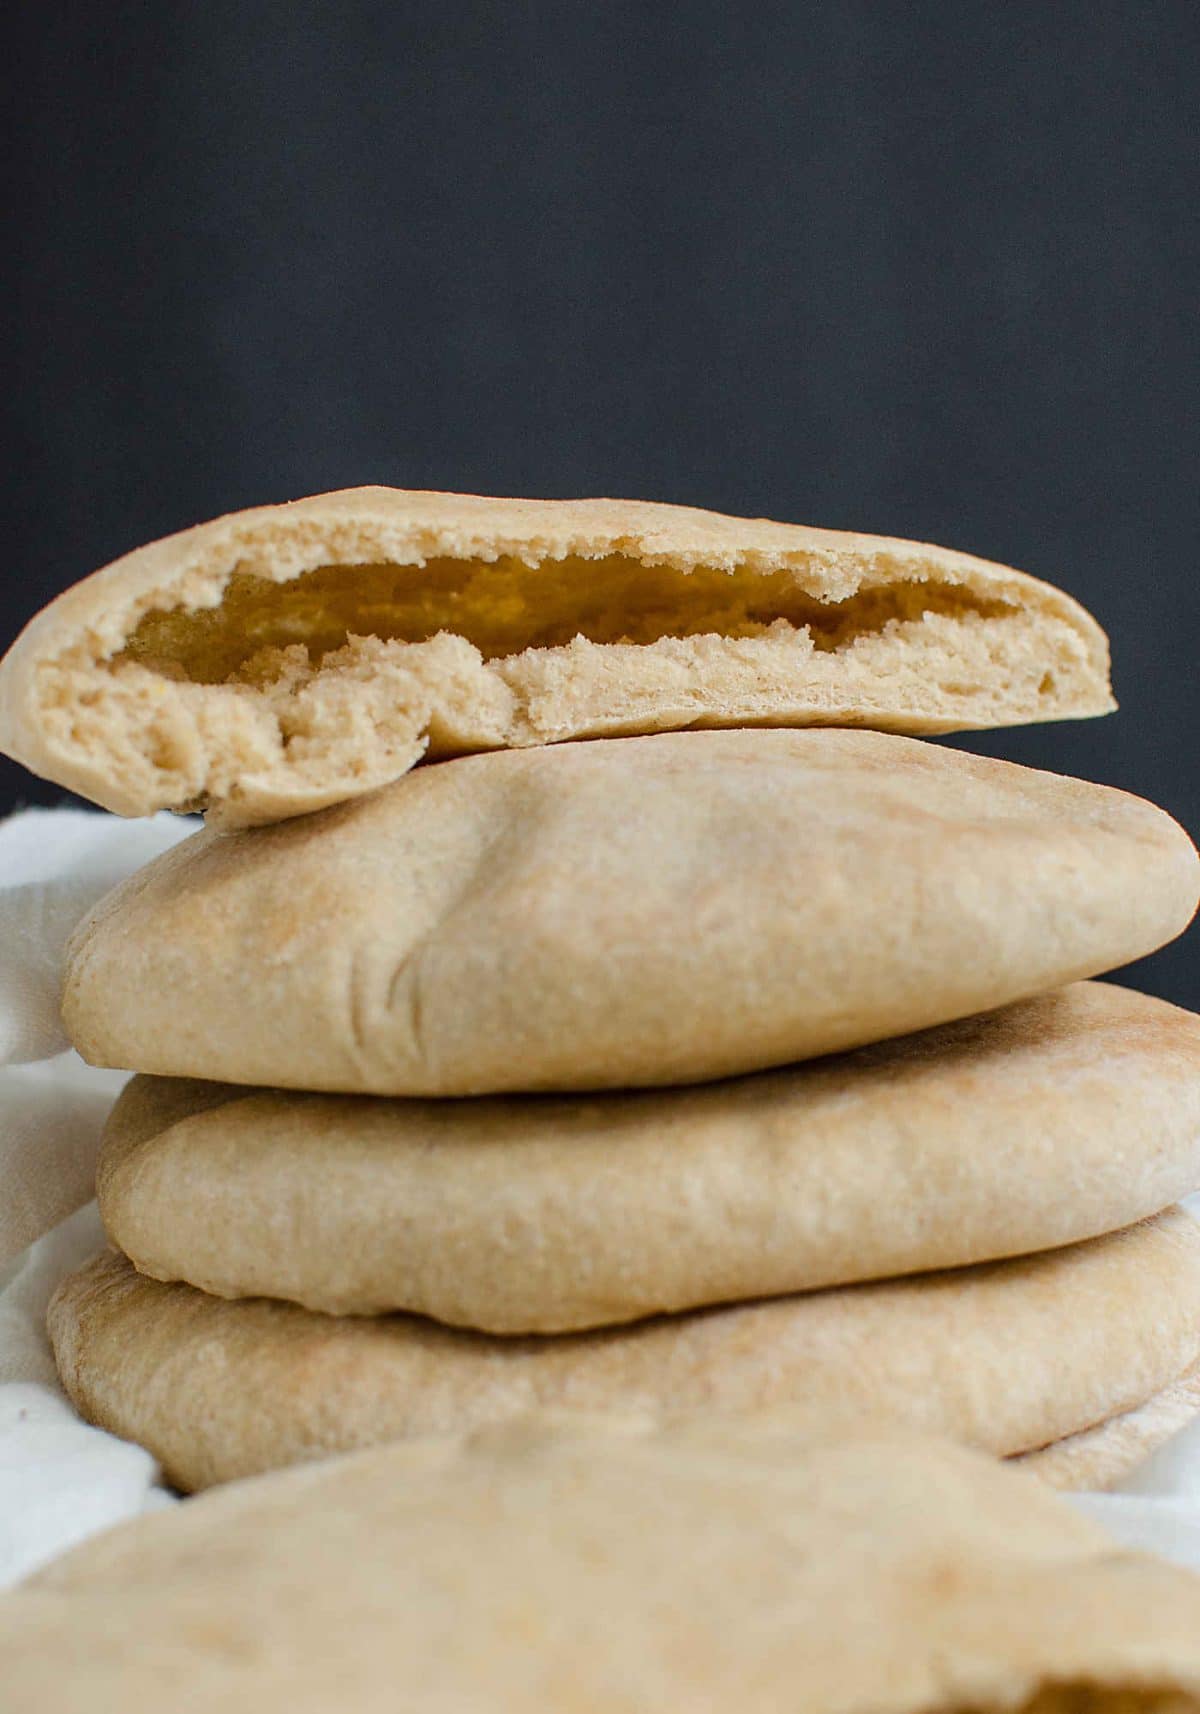 Stack of baked pita bread is ready to serve. Upper bread on the stack cut into half showing the inside texture. 